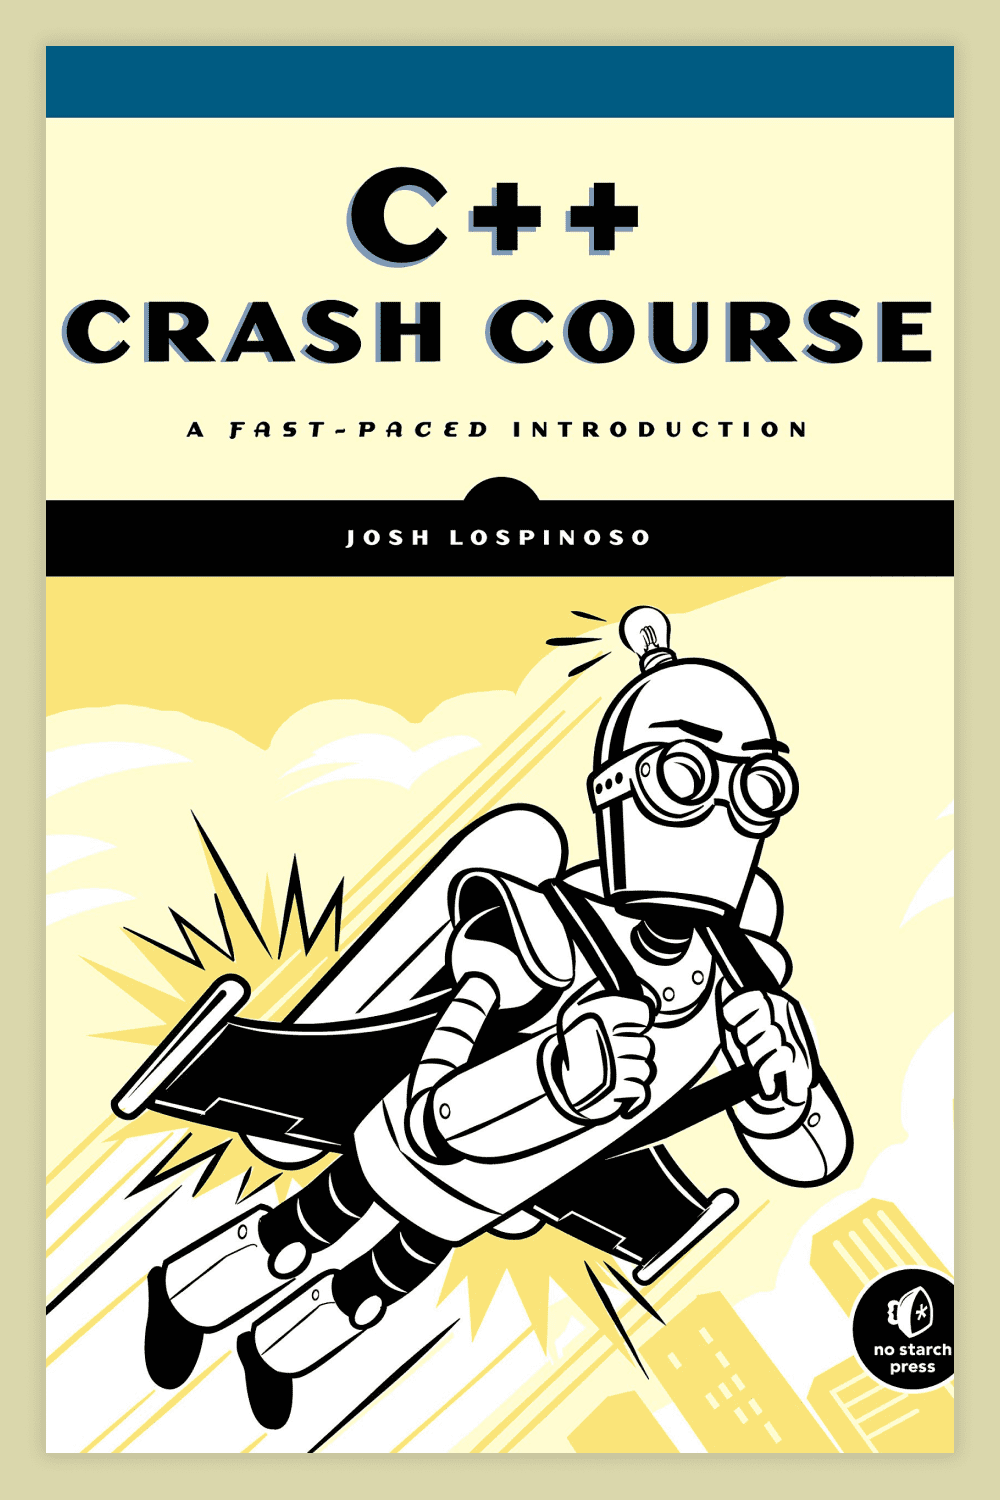 The cover of the book C++ Crash Course: A Fast-Paced Introduction.